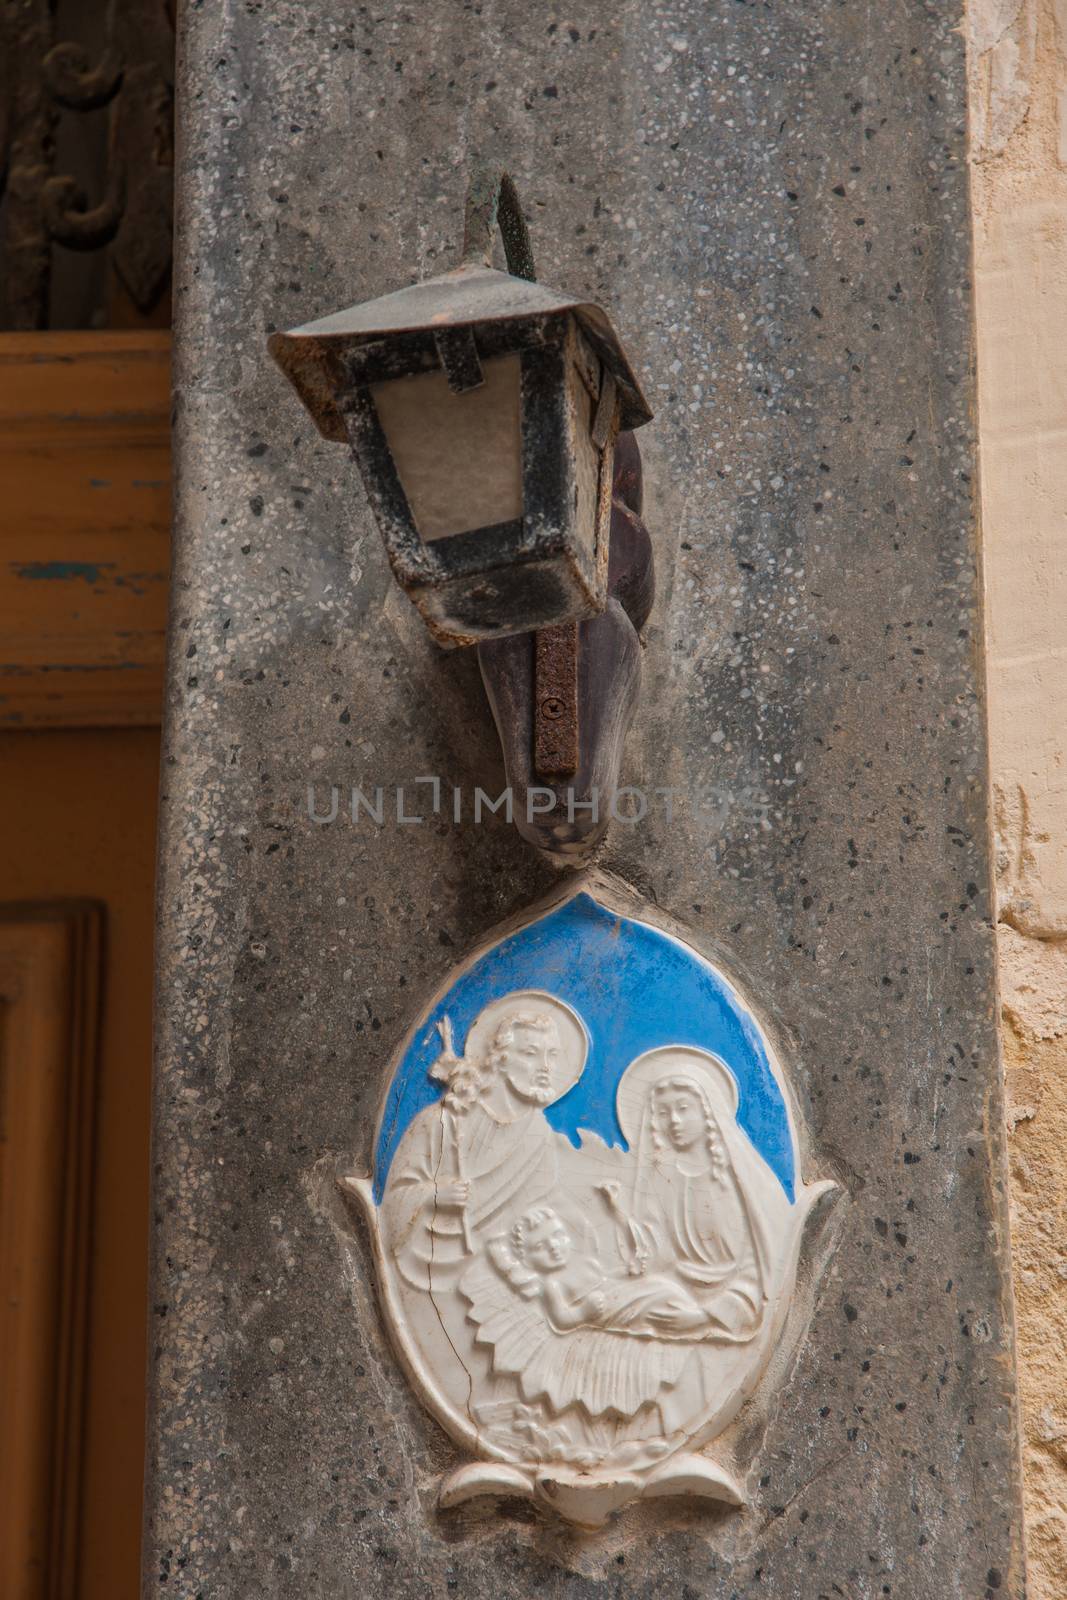 Icon and street lamp in the three cities, Malta